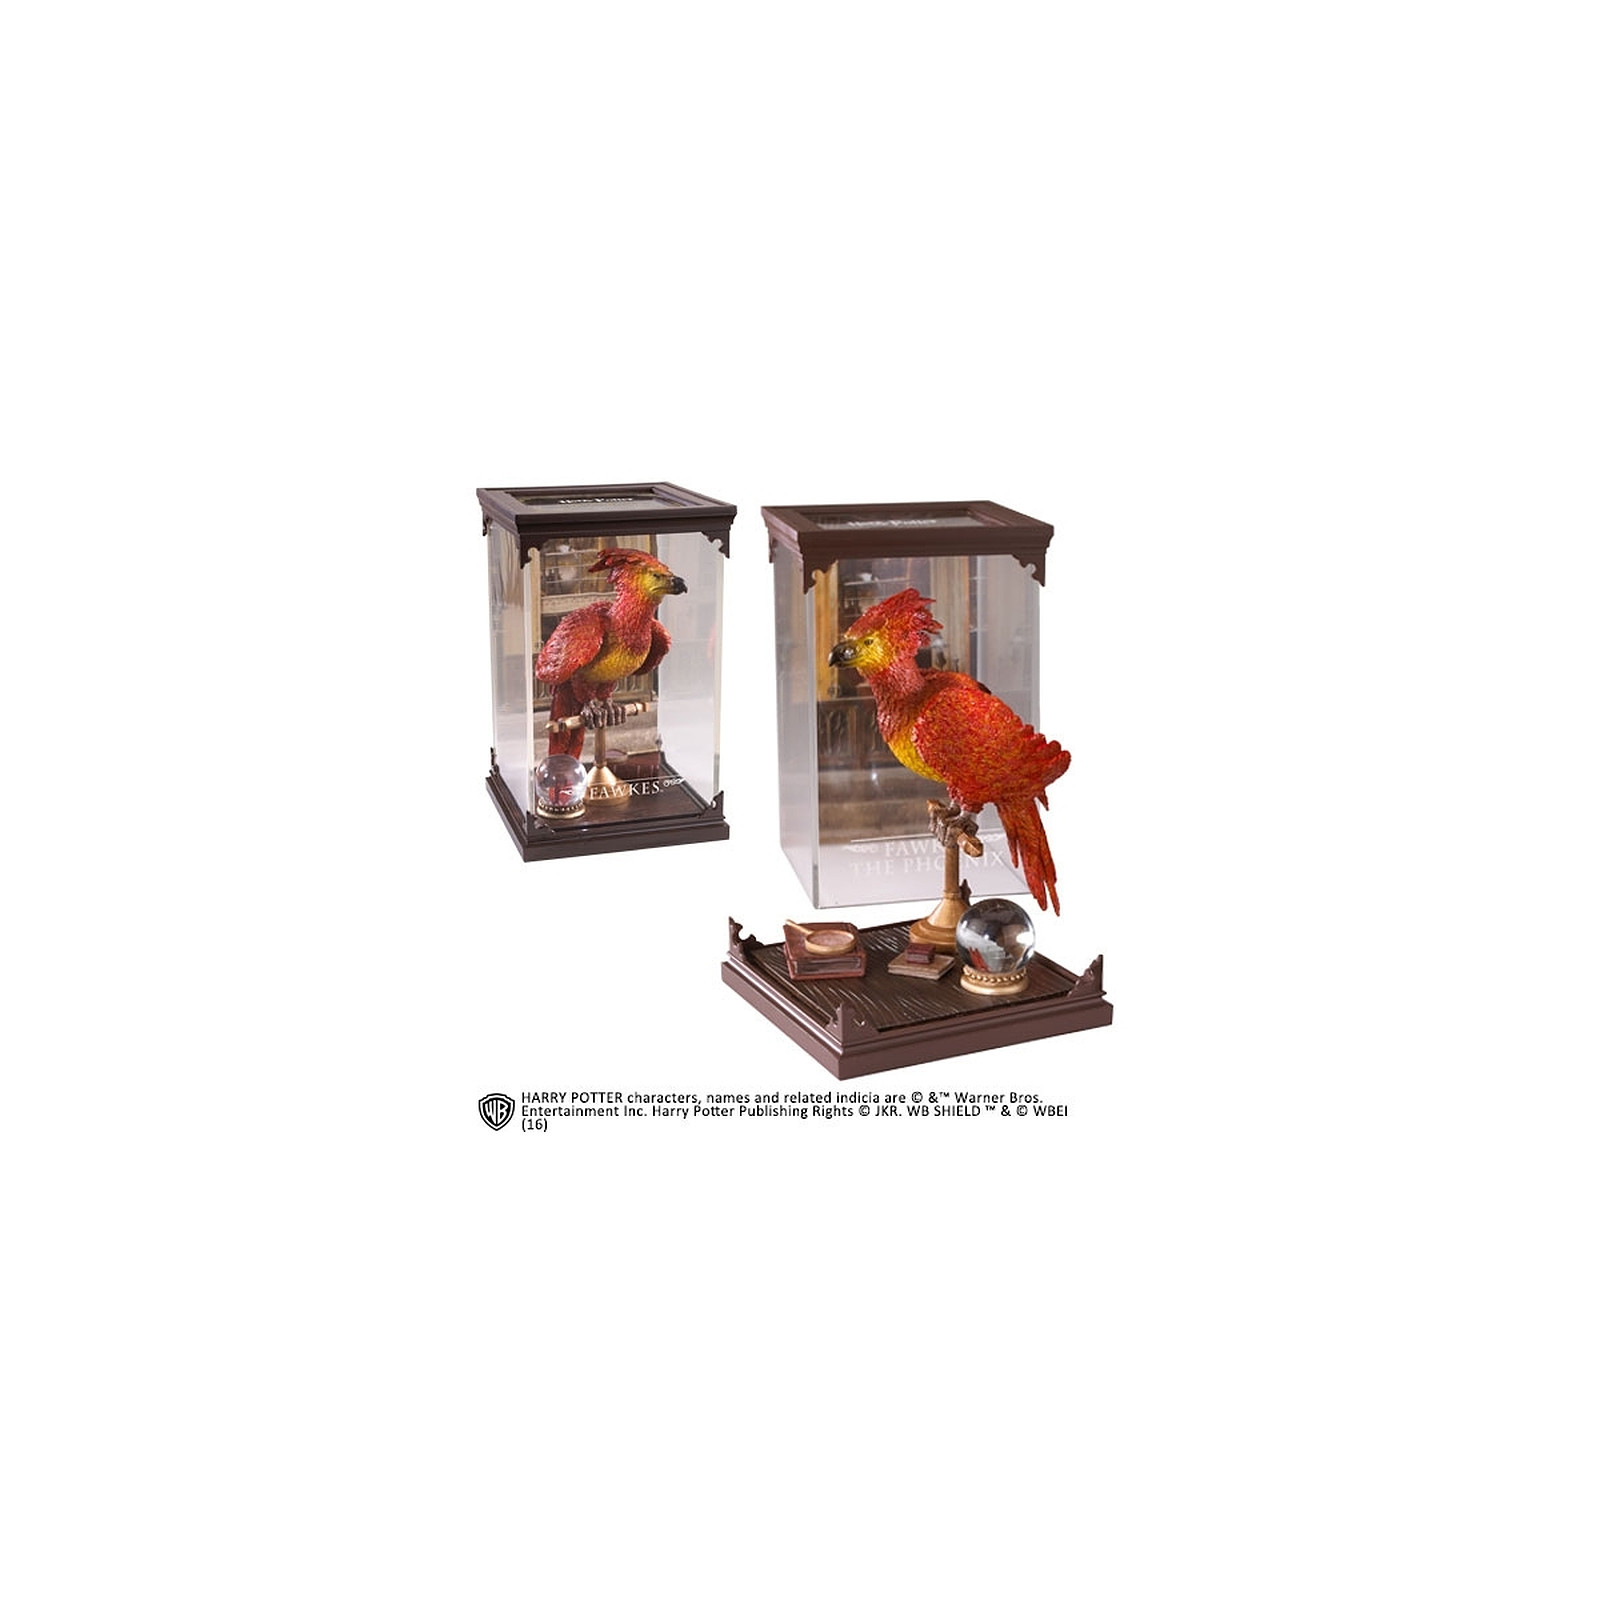 Harry Potter - Statuette Magical Creatures Fawkes 19 cm - Figurines Noble Collection